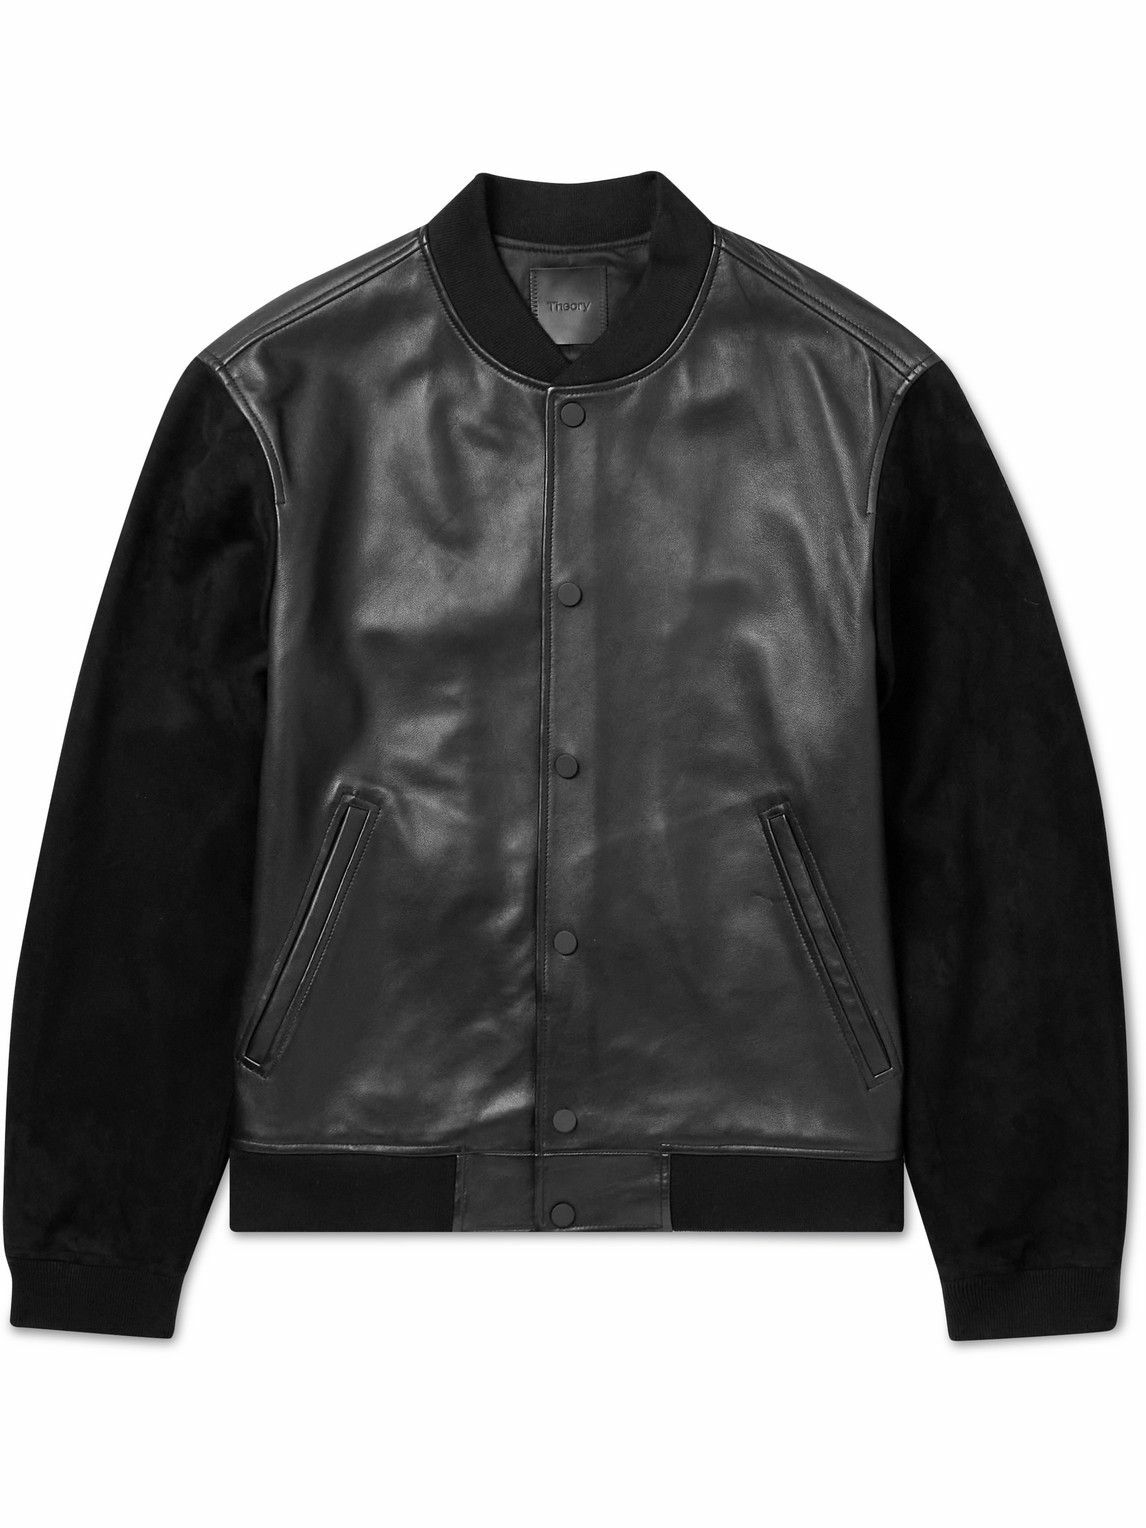 Theory - Varsity Suede-Trimmed Leather Bomber Jacket - Black Theory